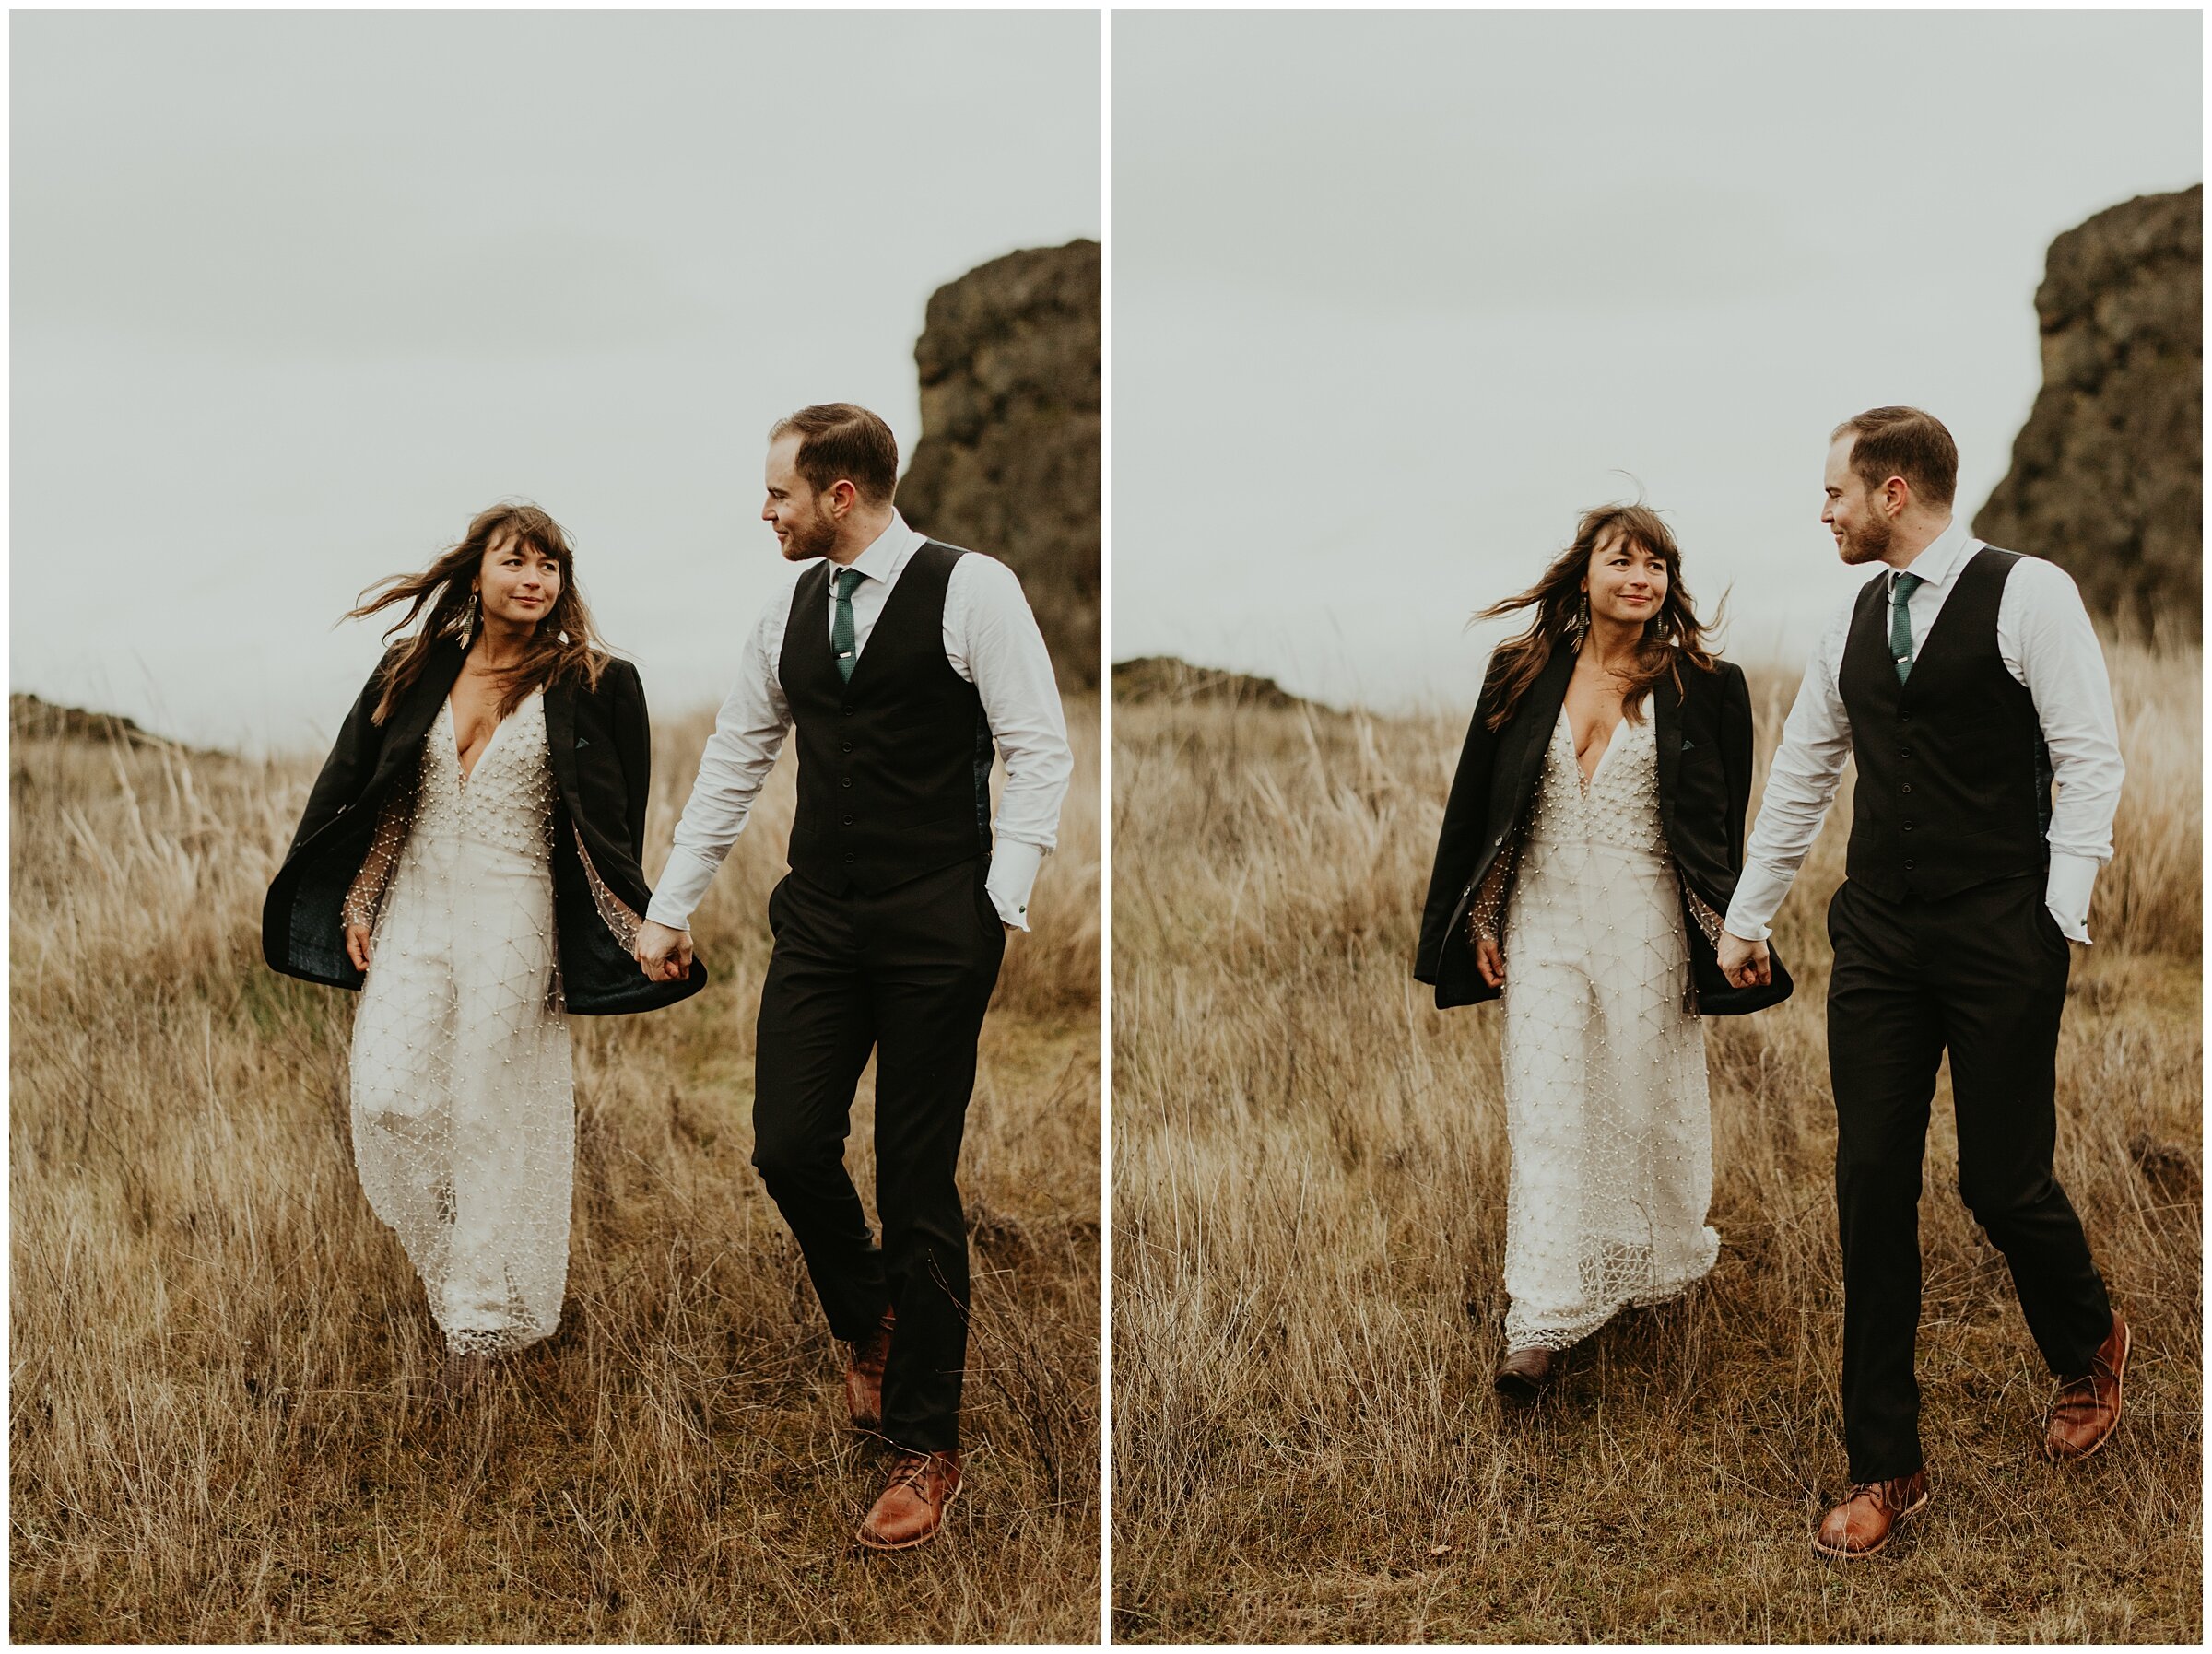 Shane + Cate's Wedding Portrait Session at Horse Thief Butte, Columbia River Gorge by PNW Elopement Photographer, Kamra Fuller Photography